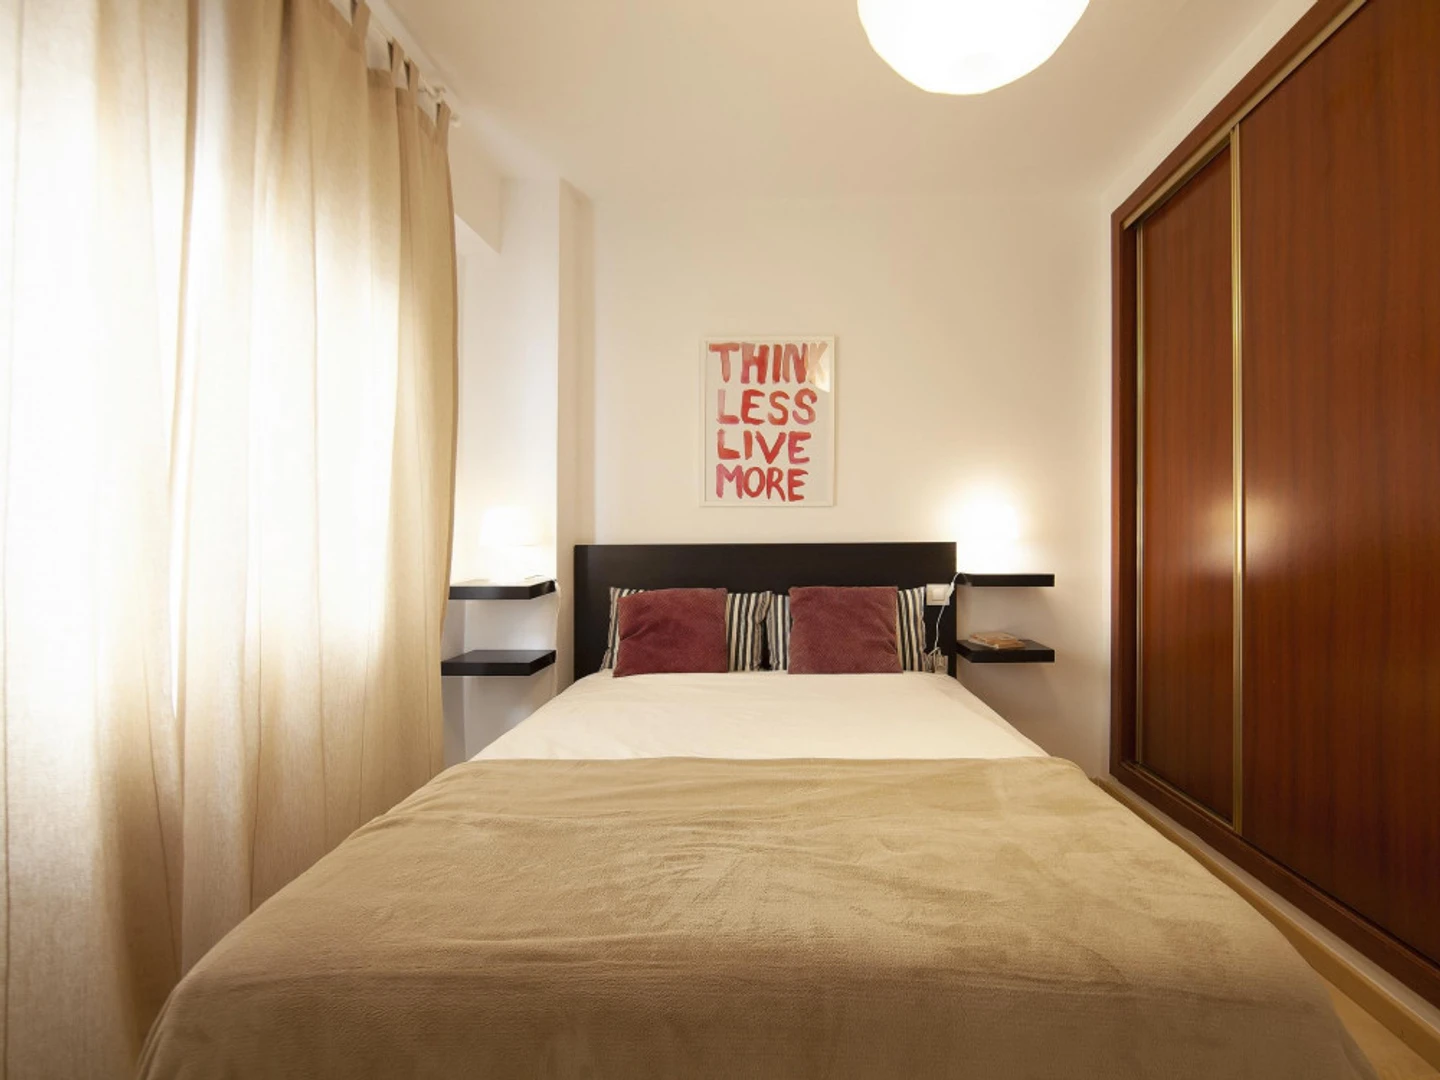 Accommodation in the centre of Malaga